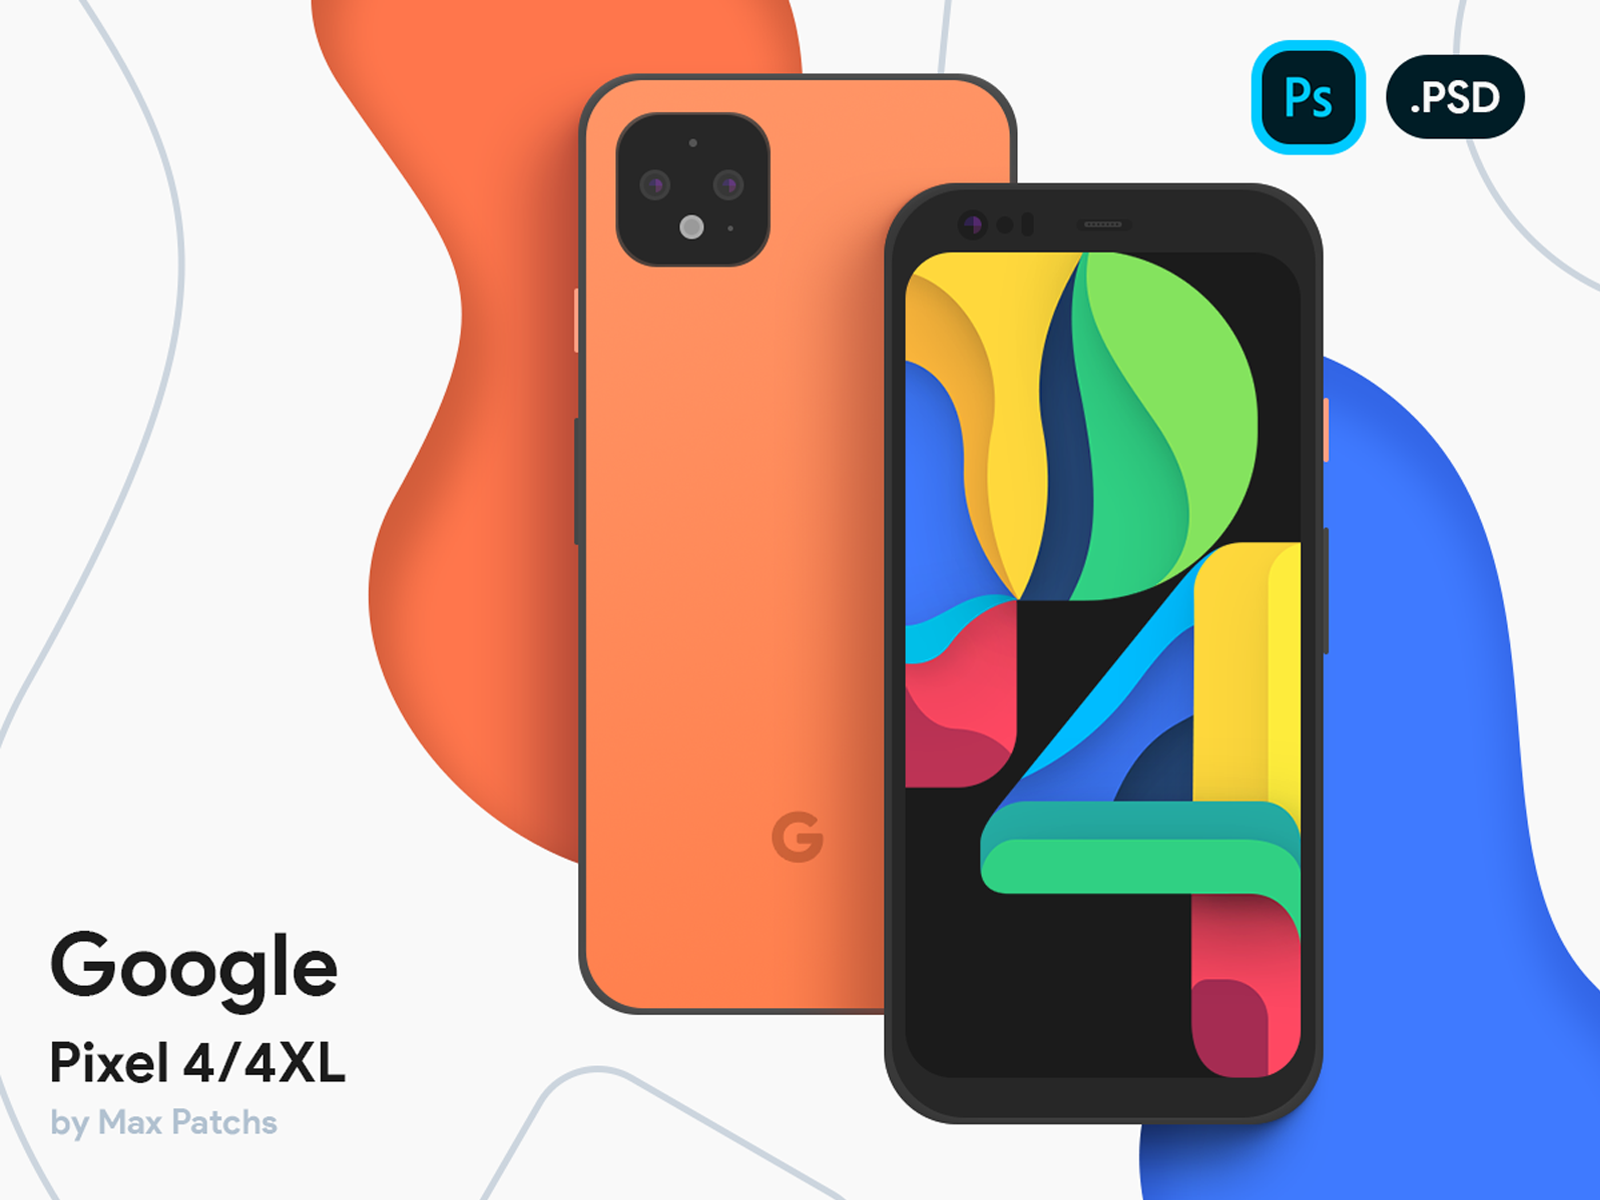 Google Pixel 4/4XL Vector Mockup by Max Patchs on Dribbble